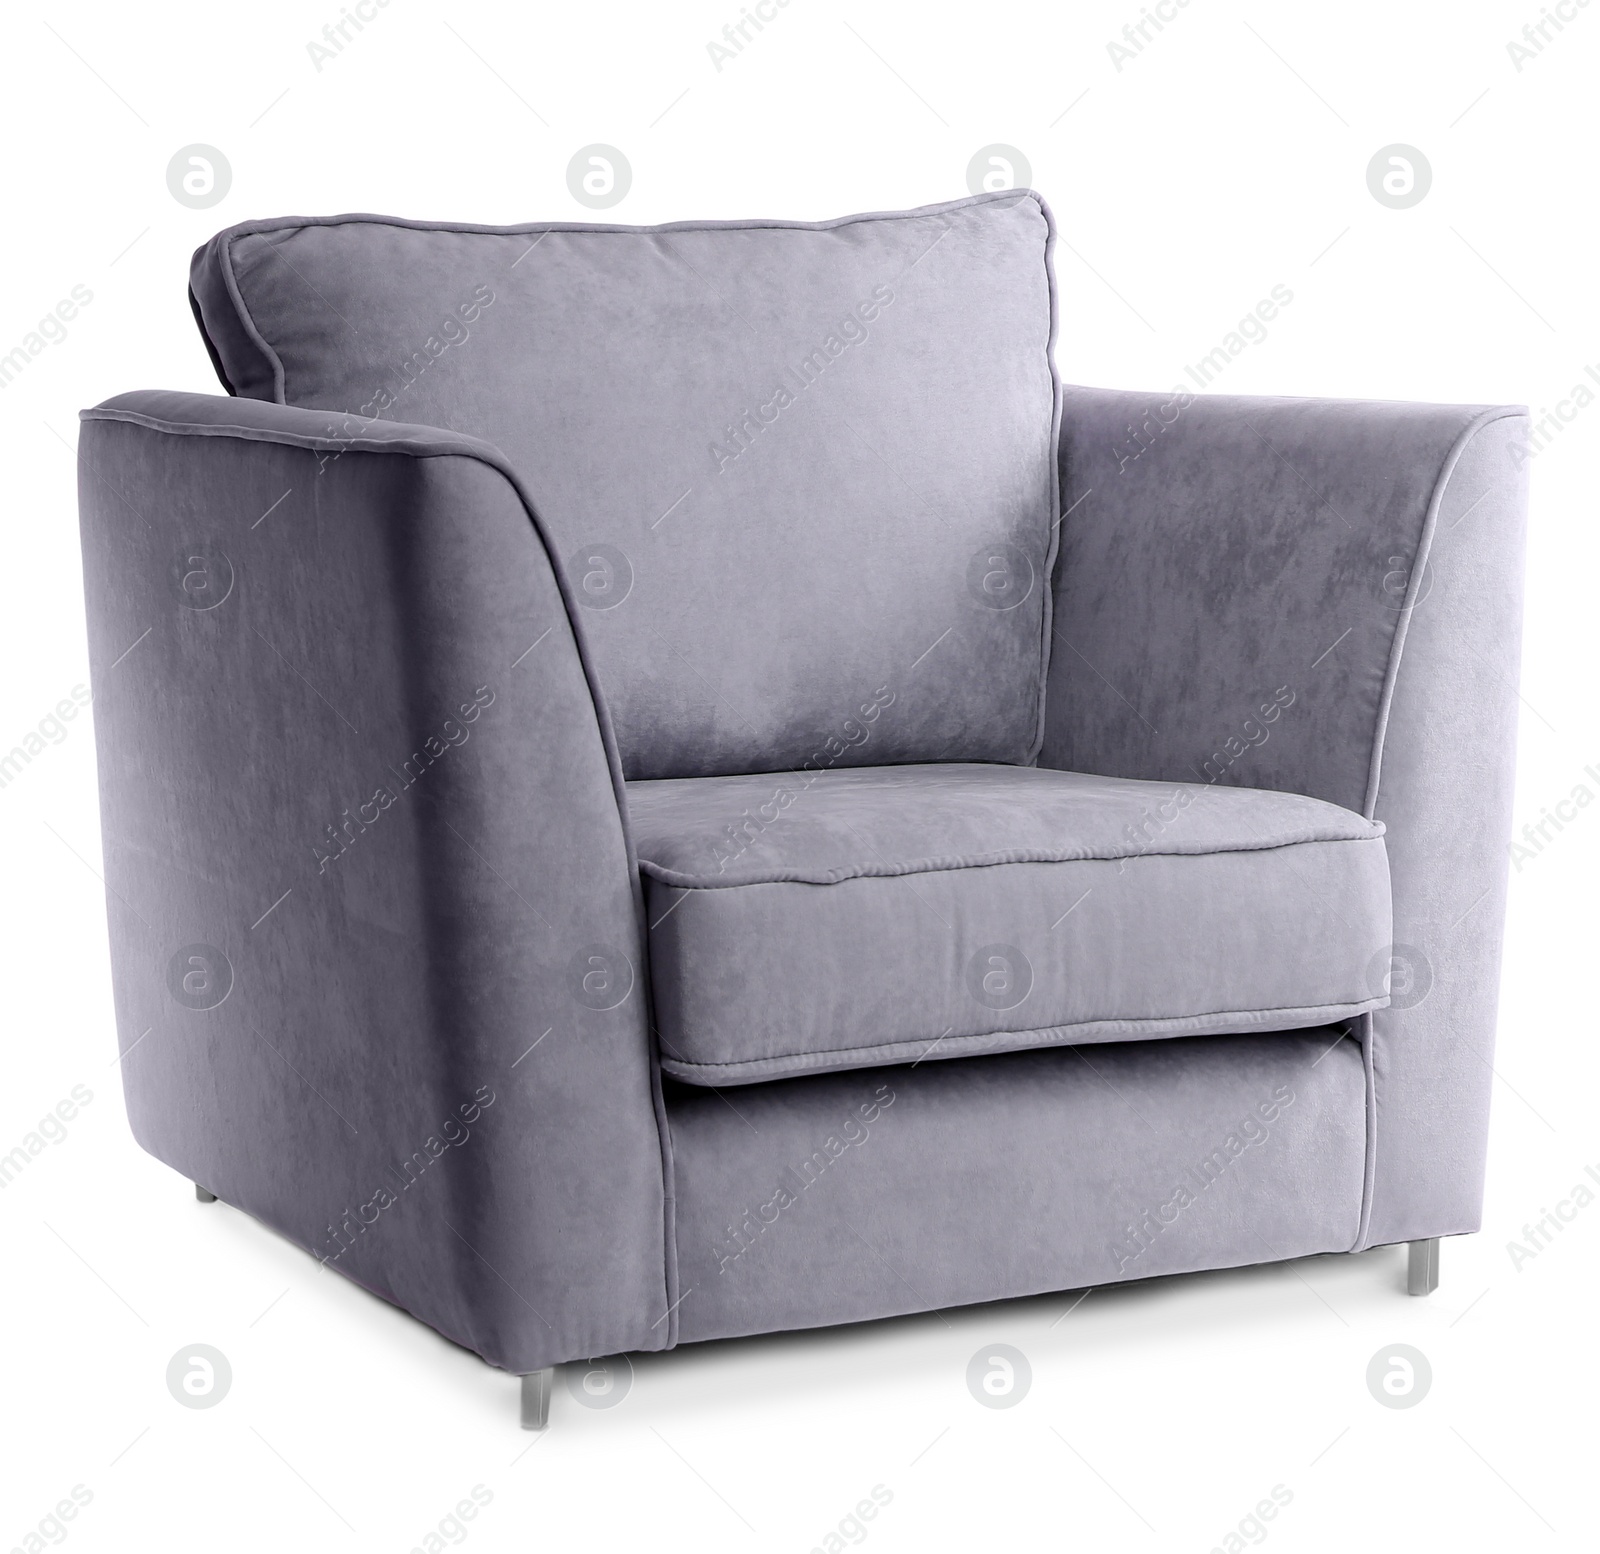 Image of One comfortable purple gray armchair isolated on white